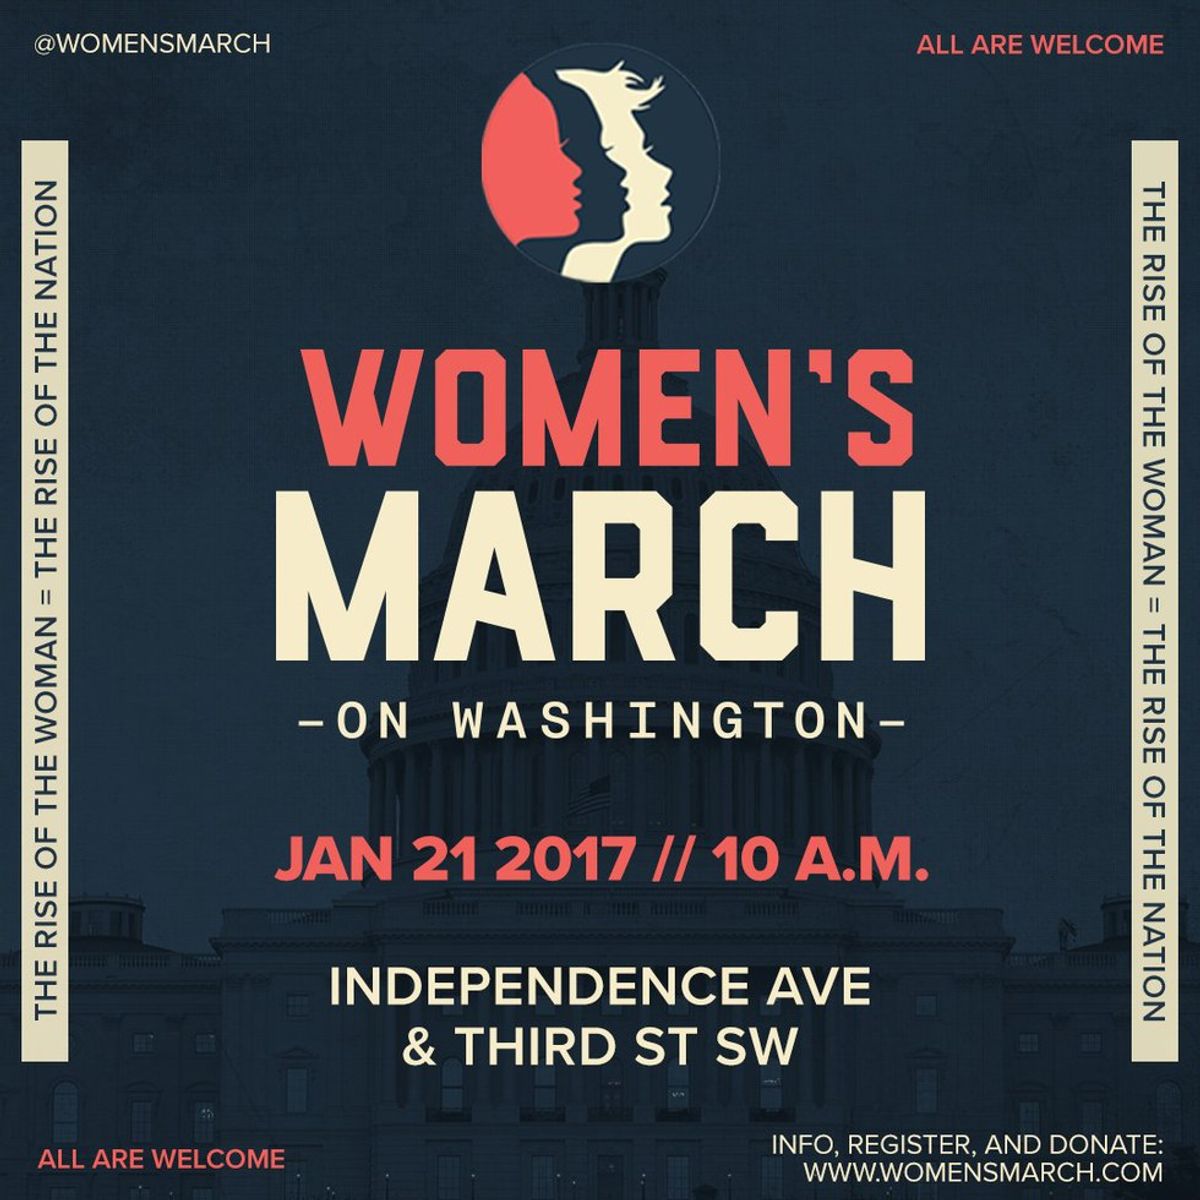 Join the Women's March on Washington this Saturday